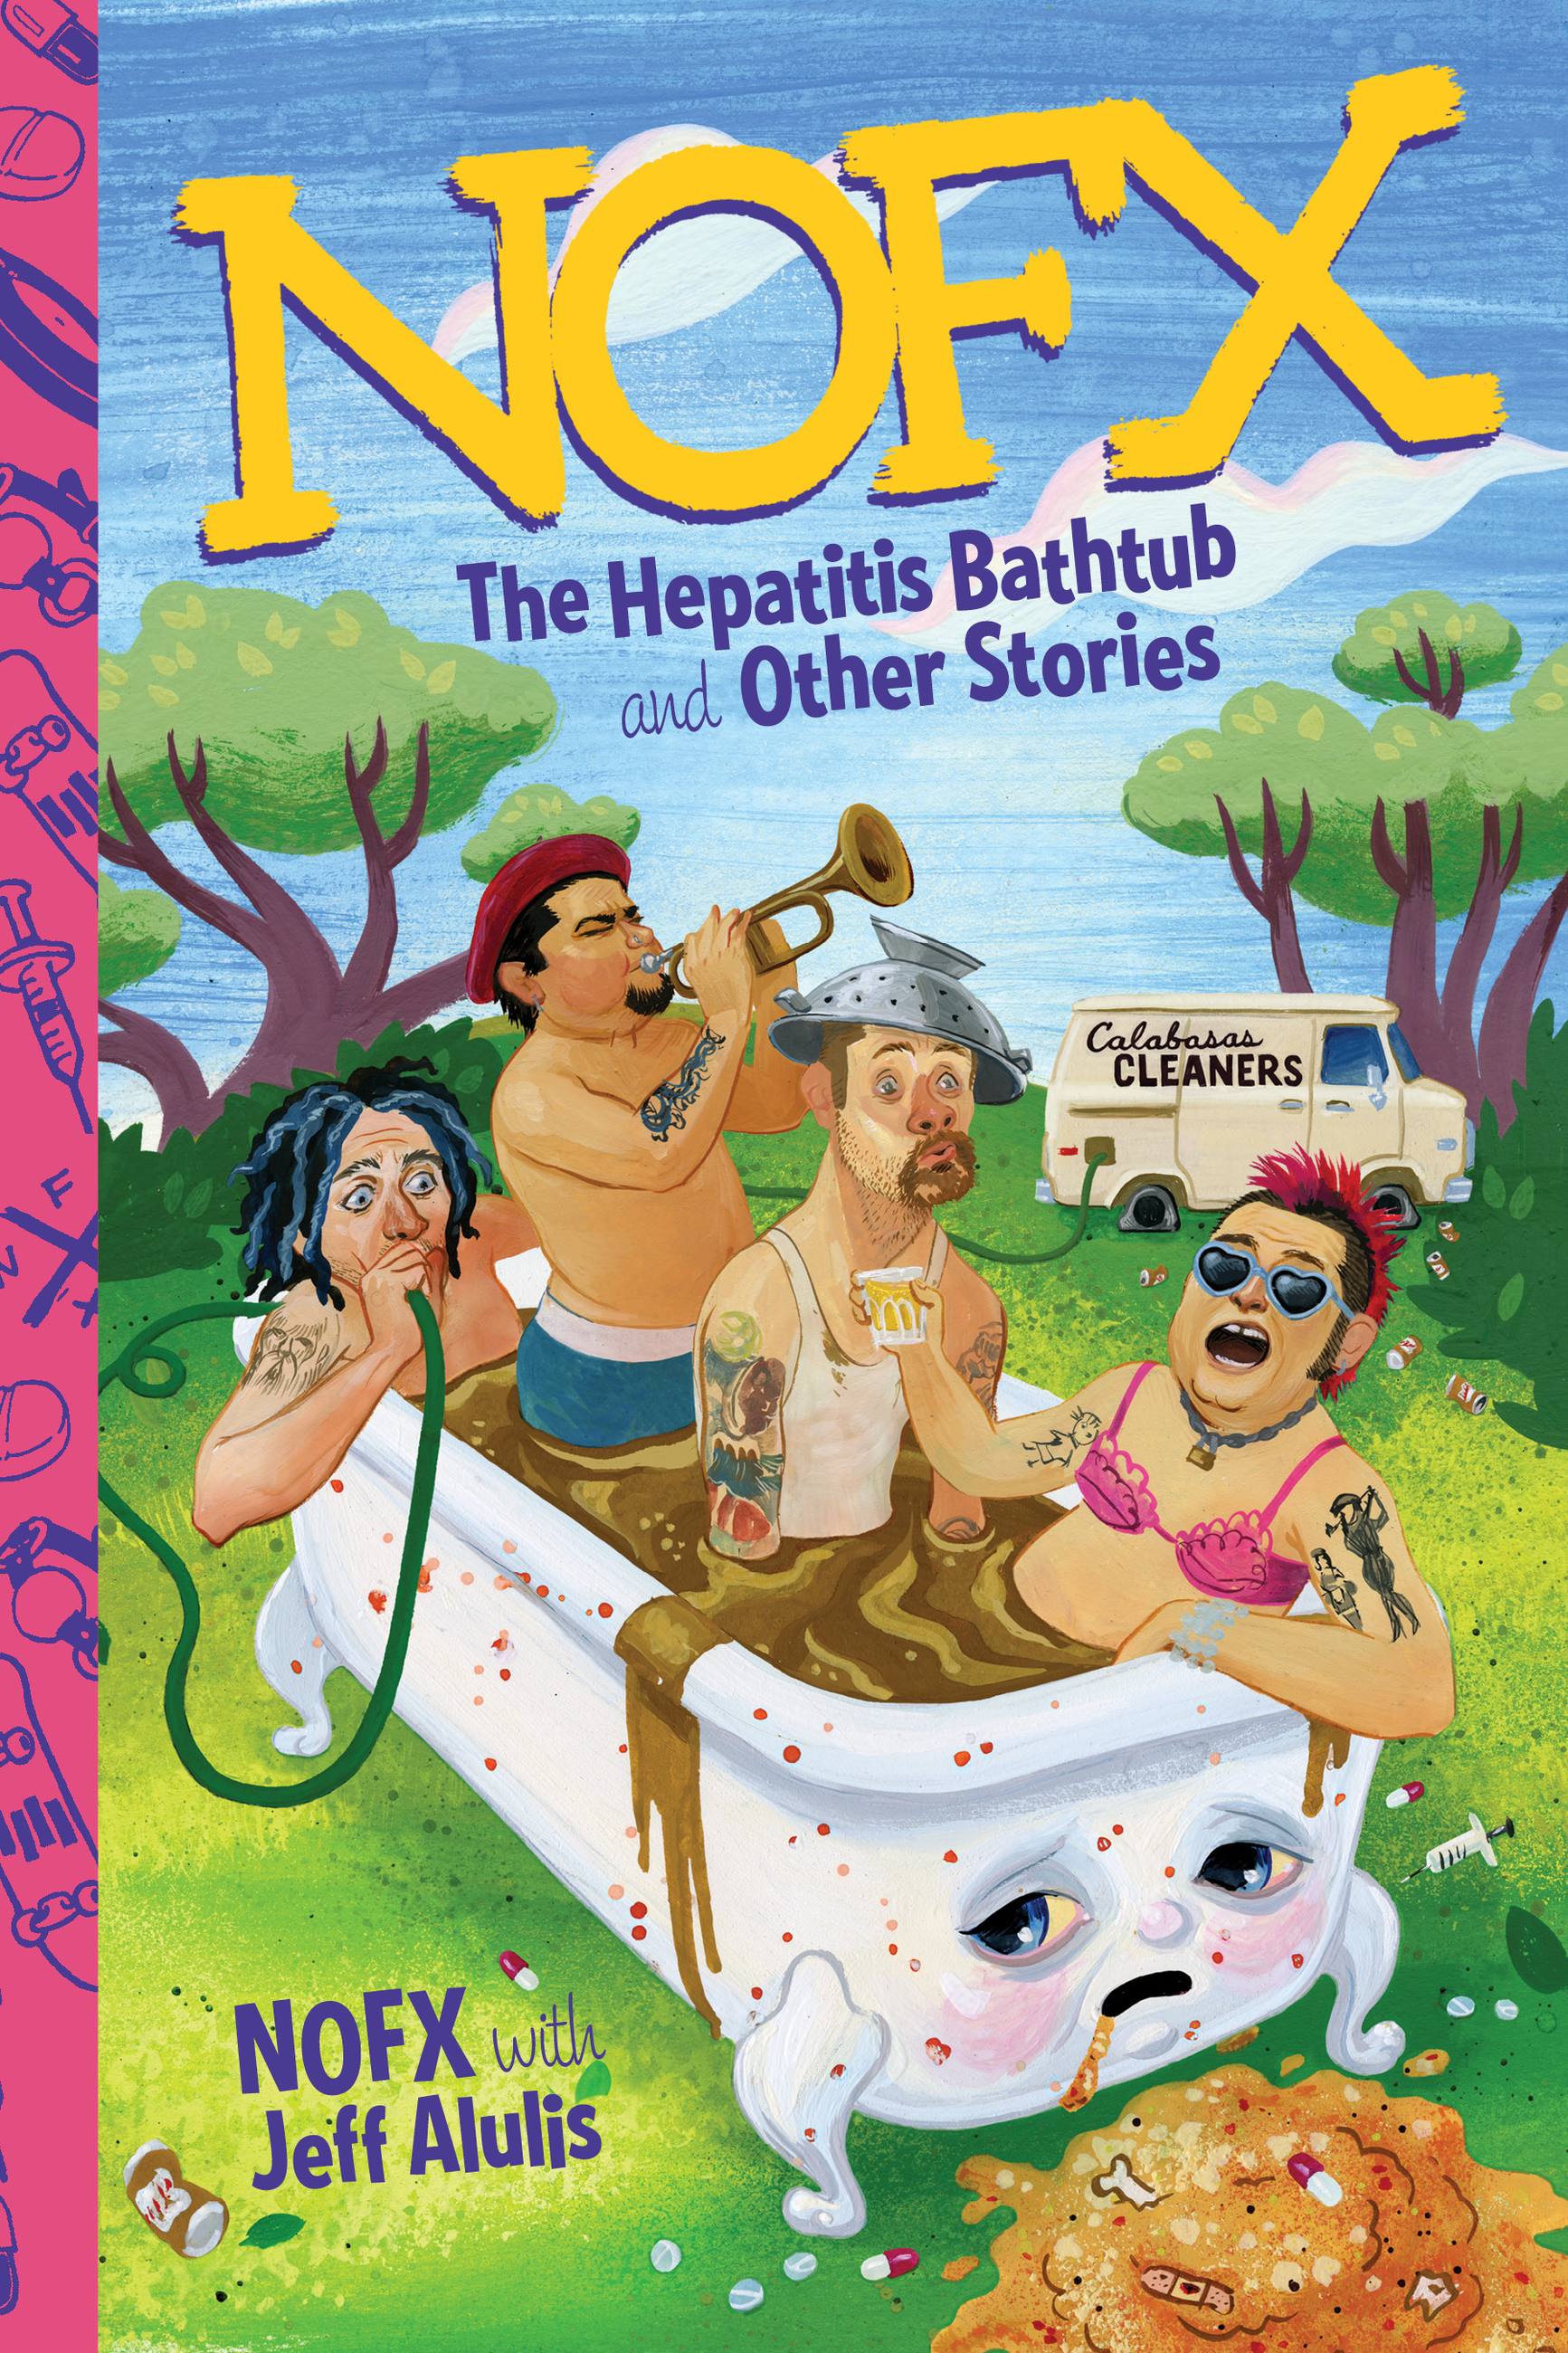 Animated Naked Beach - NOFX by NOFX | Hachette Book Group